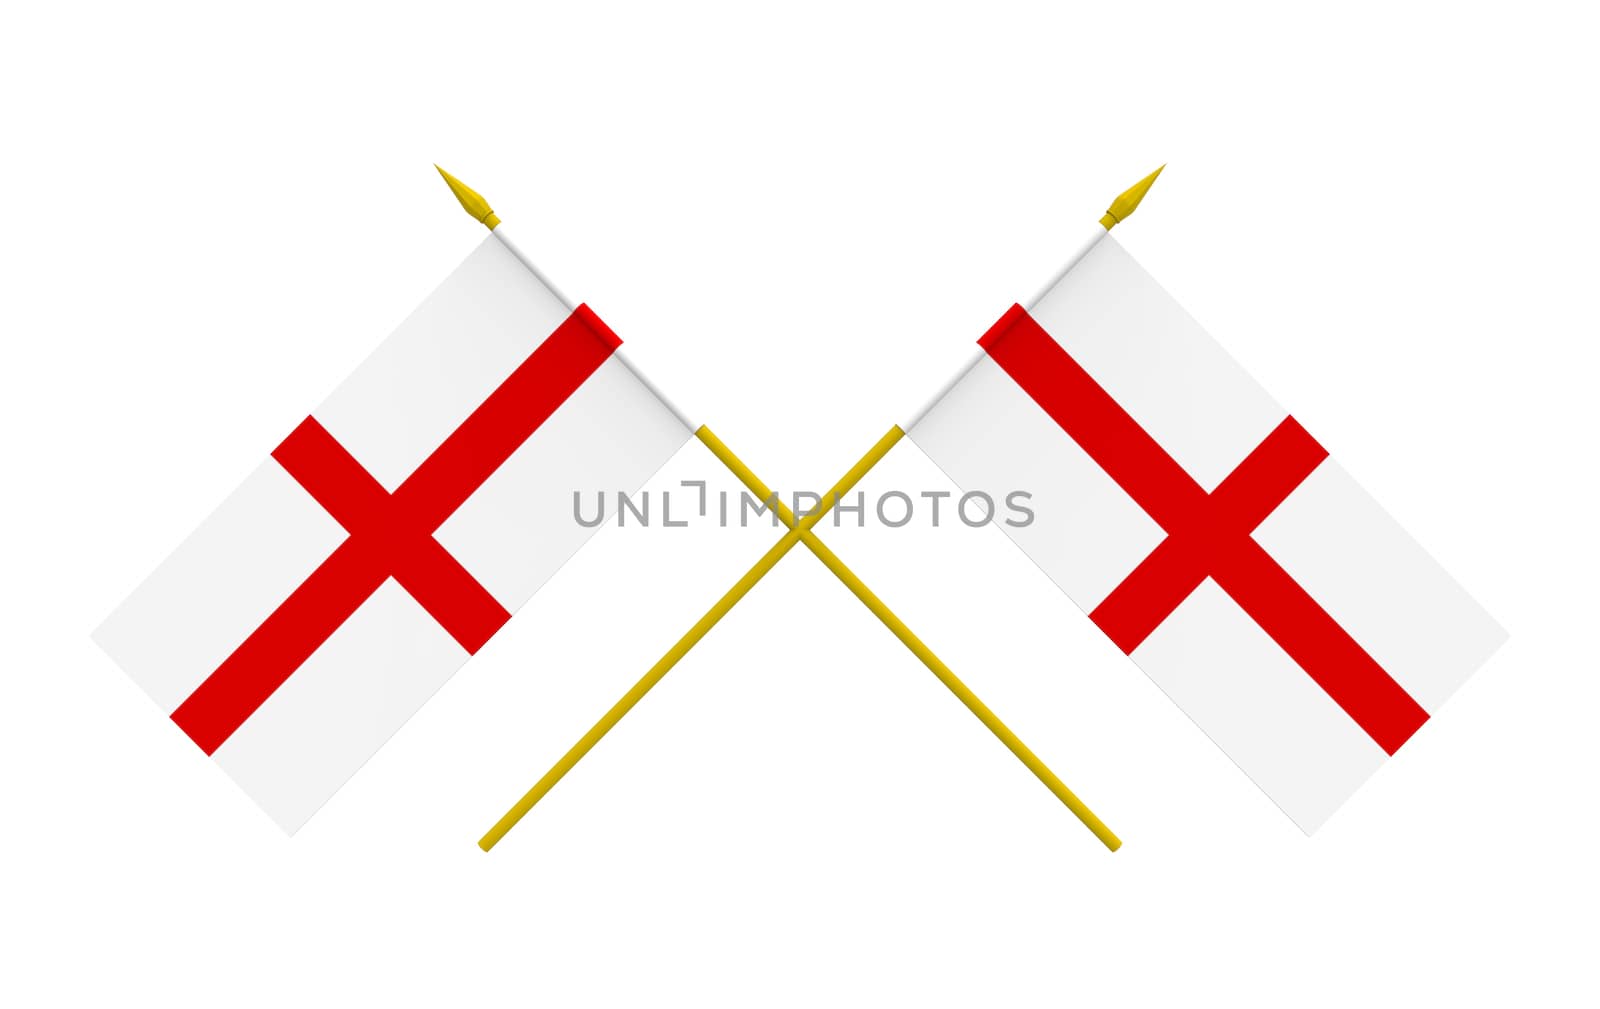 Two crossed flags of England, 3d render, isolated on white